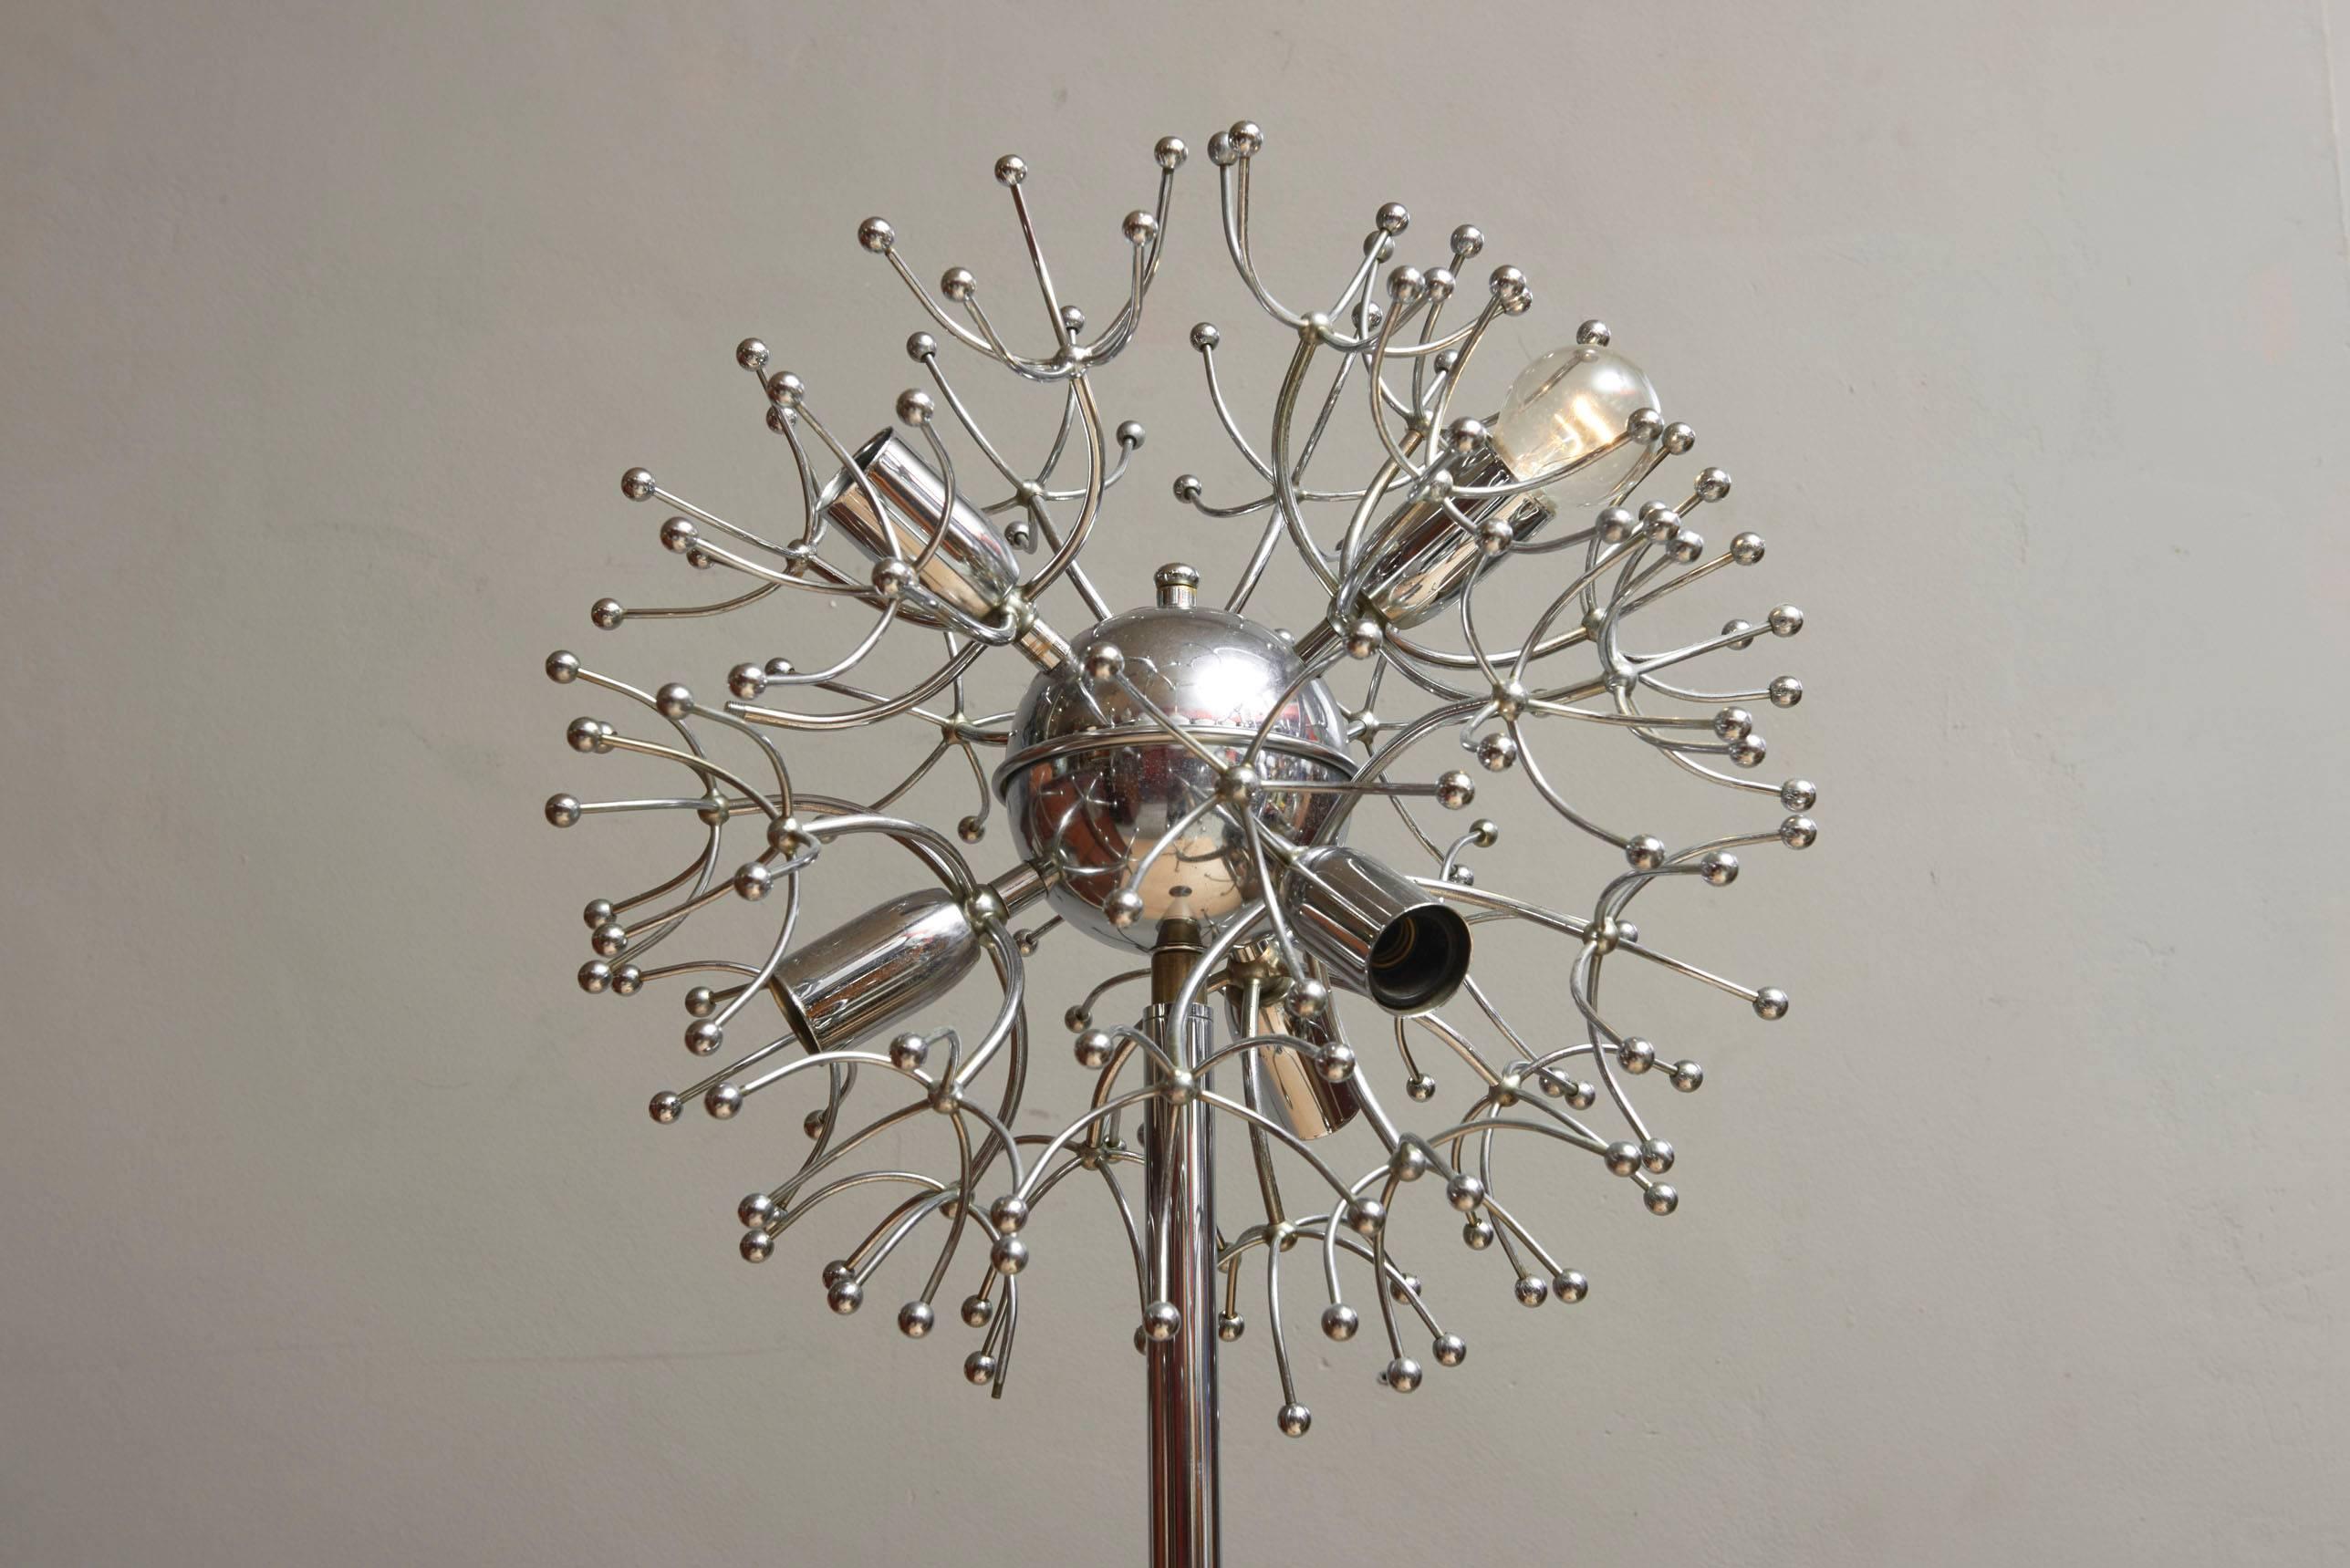 An exceptional Mid-Century Sputnik floor lamp, inspired by the Atomium in Brussels, 1958, and the Russian spacecraft in 1957.
Italian chrome-plated Sputnik spider floor lamp.